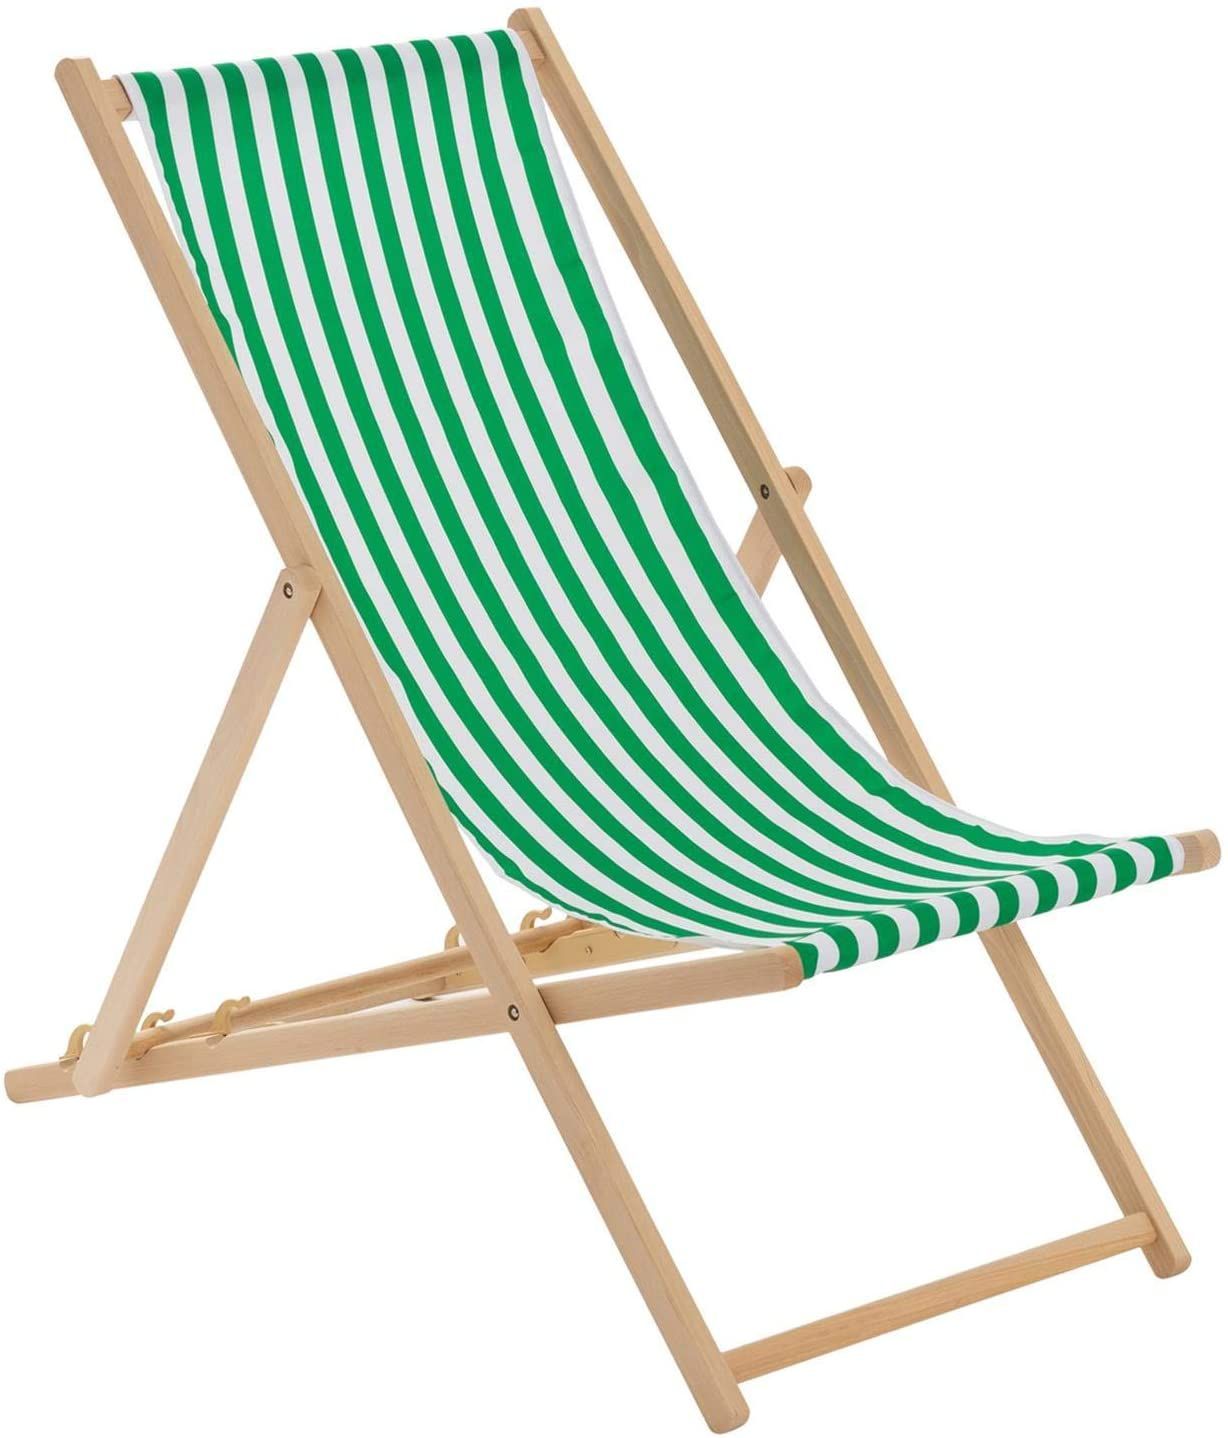 15 Best Deck Chairs To Buy Wooden Deck Chair Folding Fabric